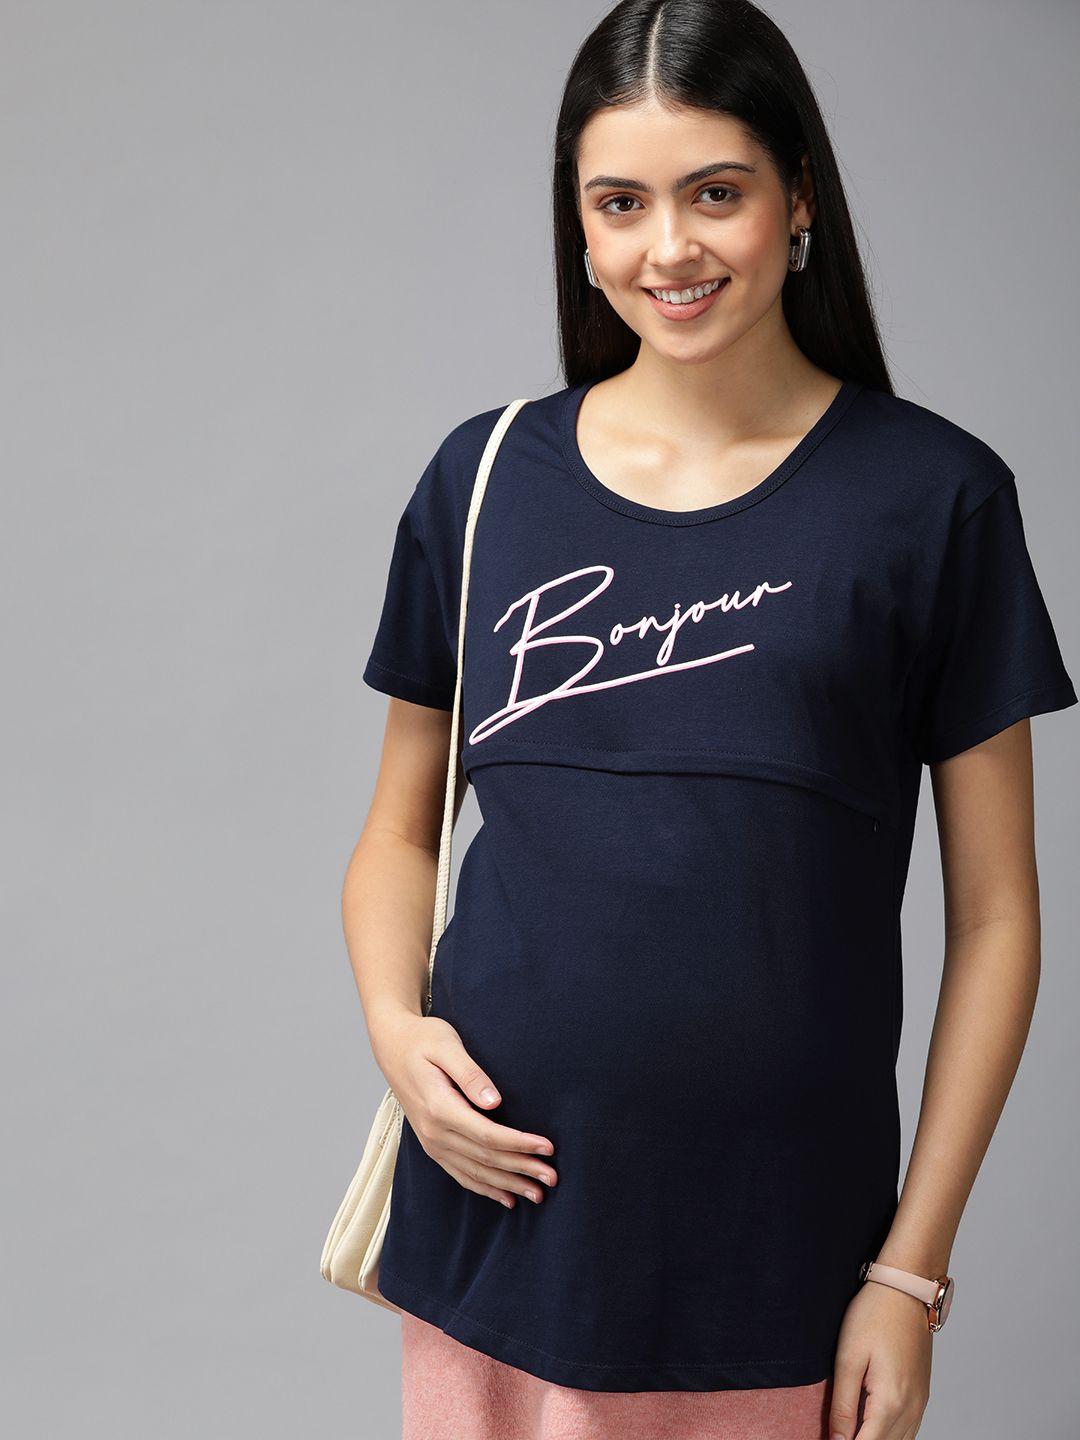 zeyo navy blue solid maternity & feeding pure cotton top